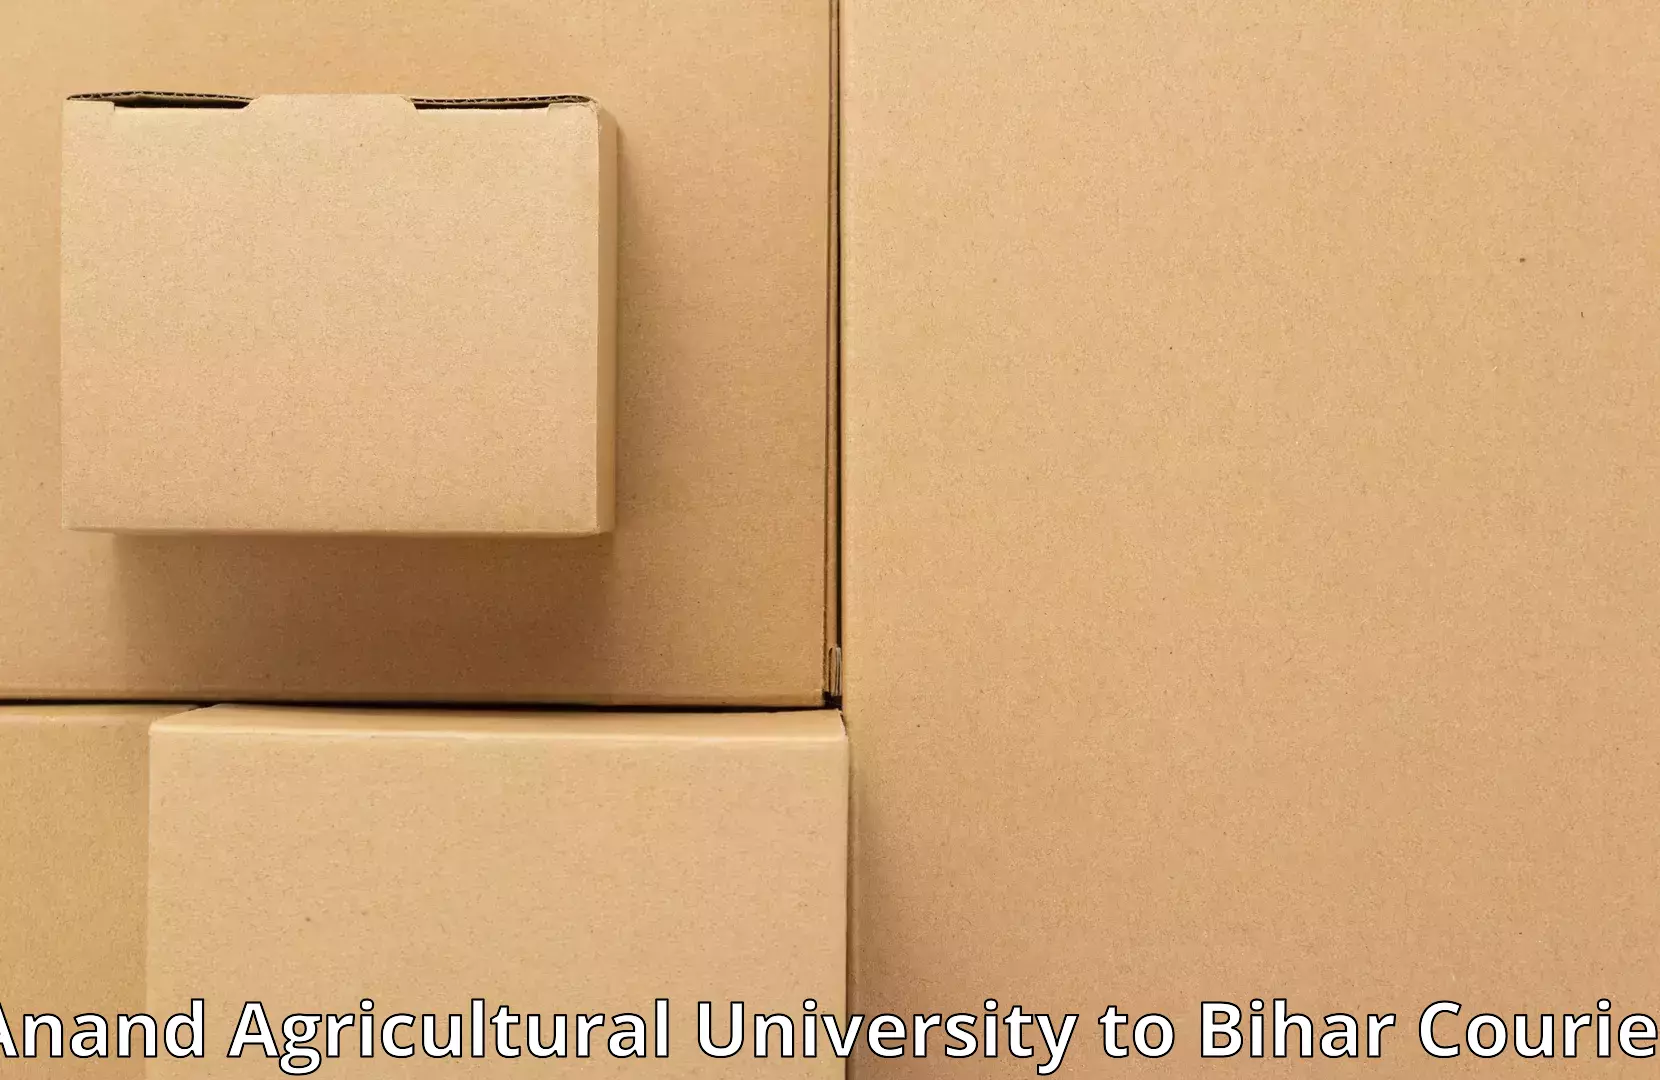 Furniture moving assistance in Anand Agricultural University to Wazirganj